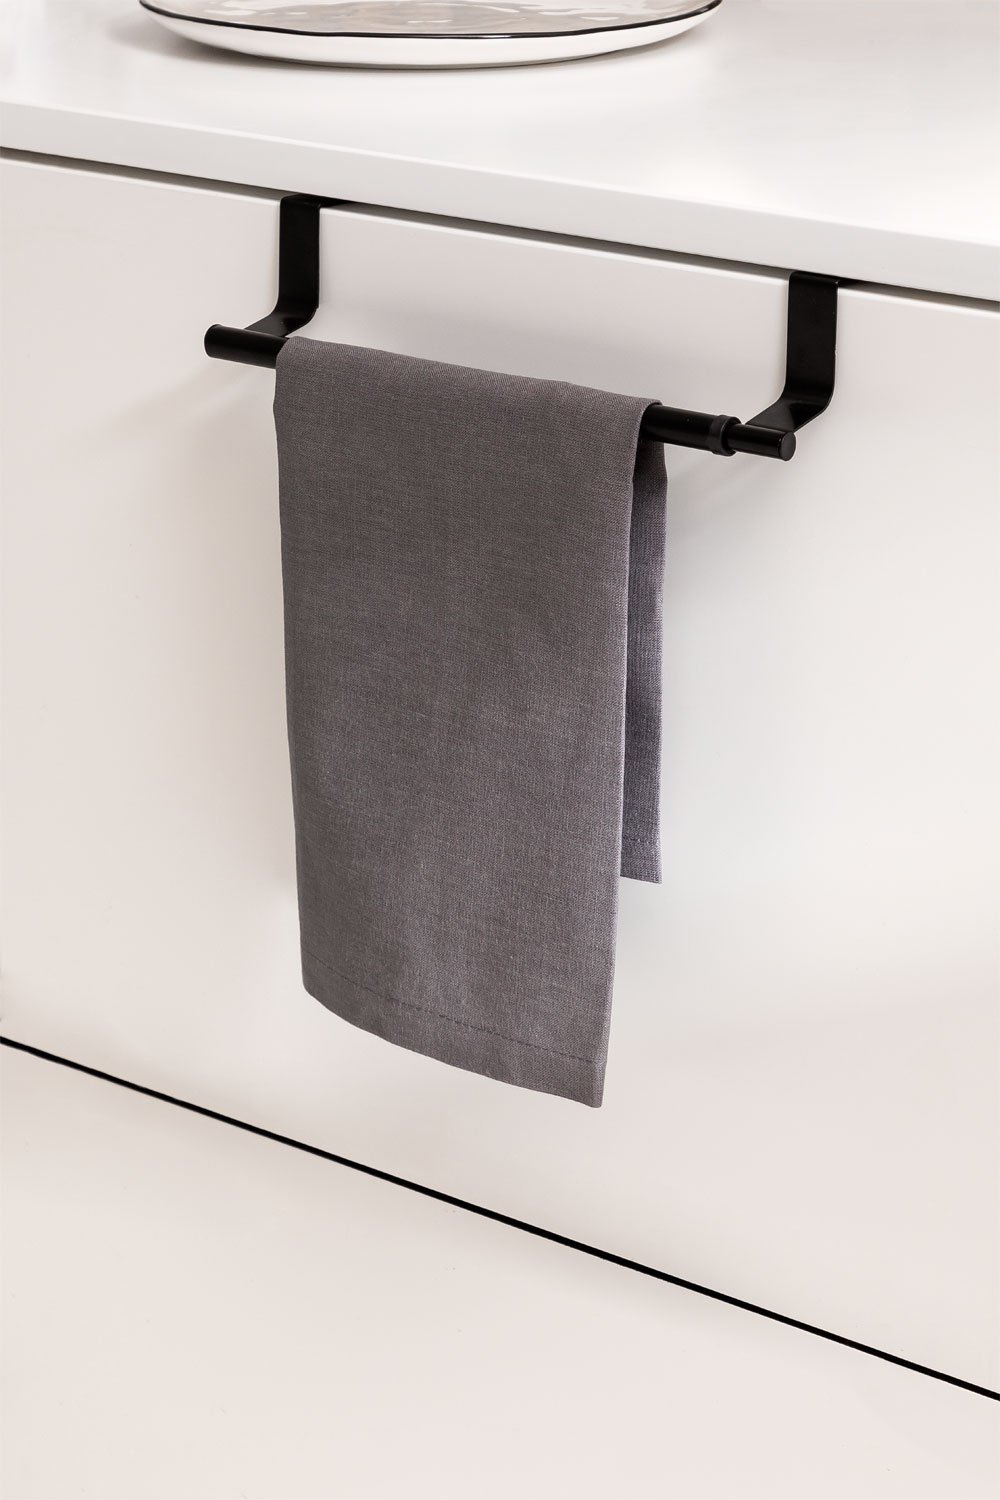 Extendable Holder for Kitchen Towels Olvena, gallery image 1